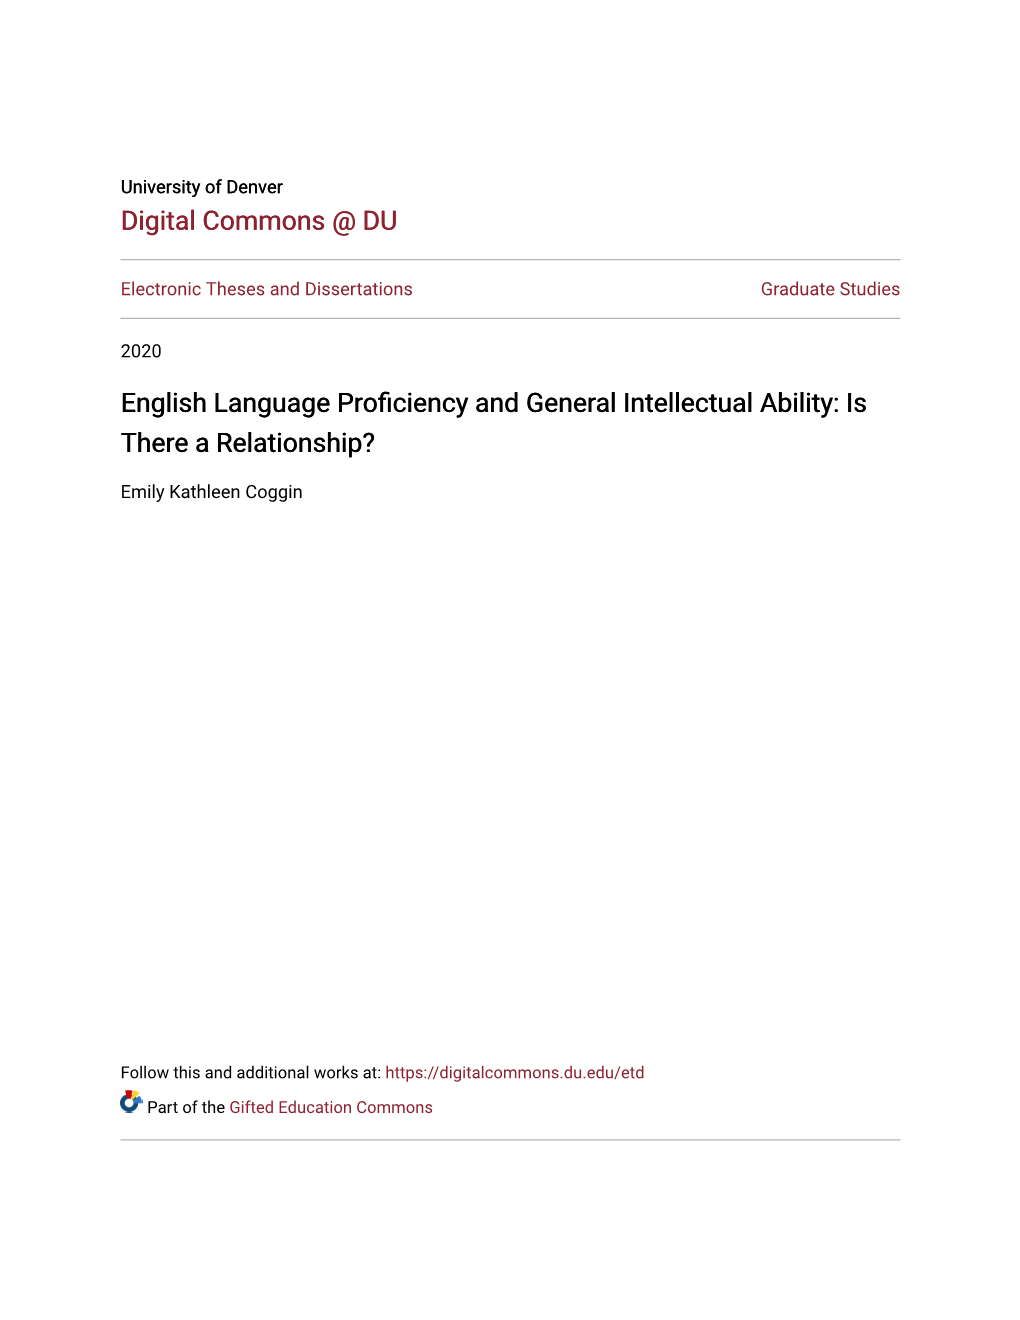 English Language Proficiency and General Intellectual Ability: Is There a Relationship?